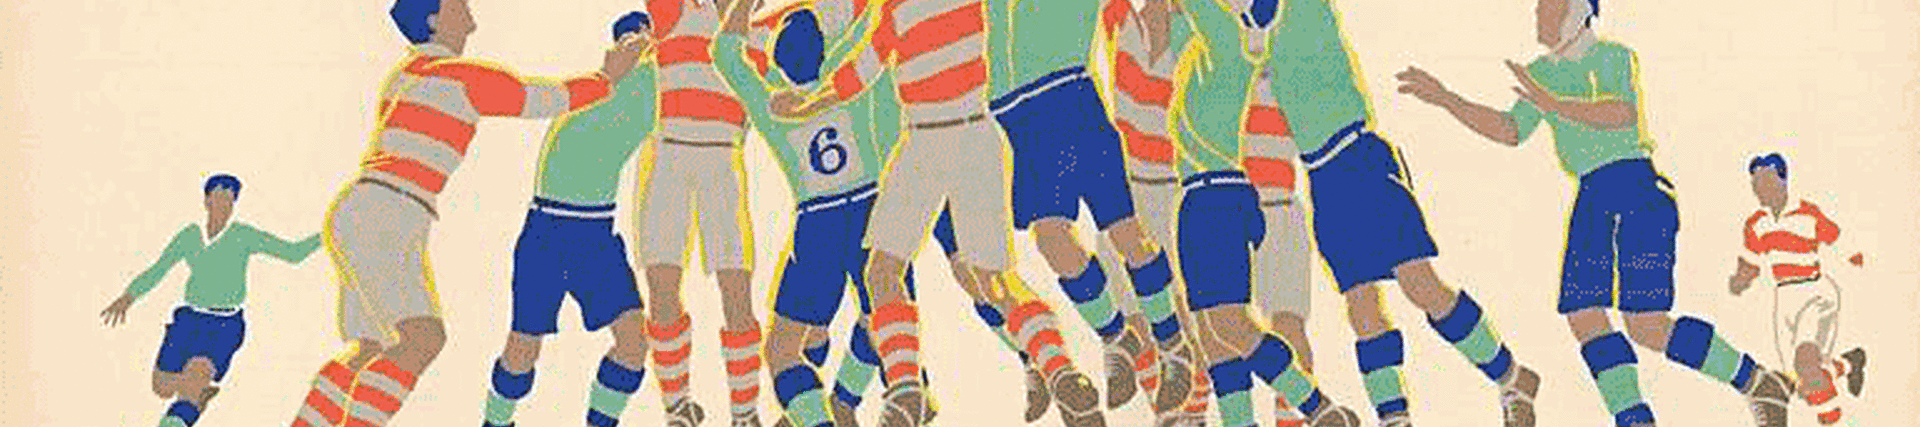 A poster of a Rugby League game